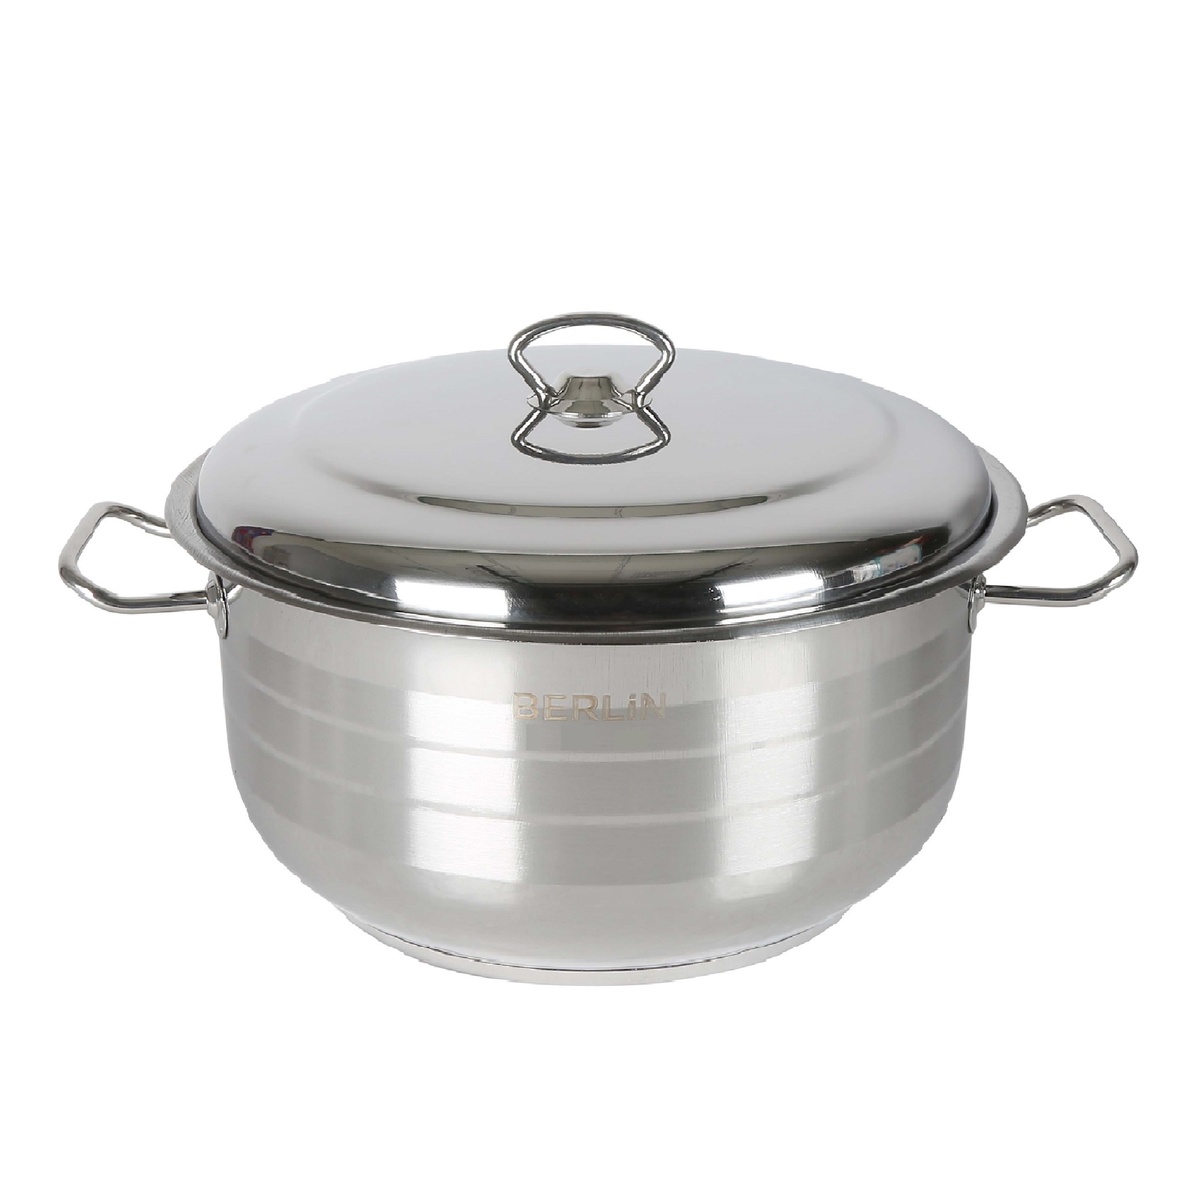 Berlin Stainless Steel Cooking Pot tro 36cm